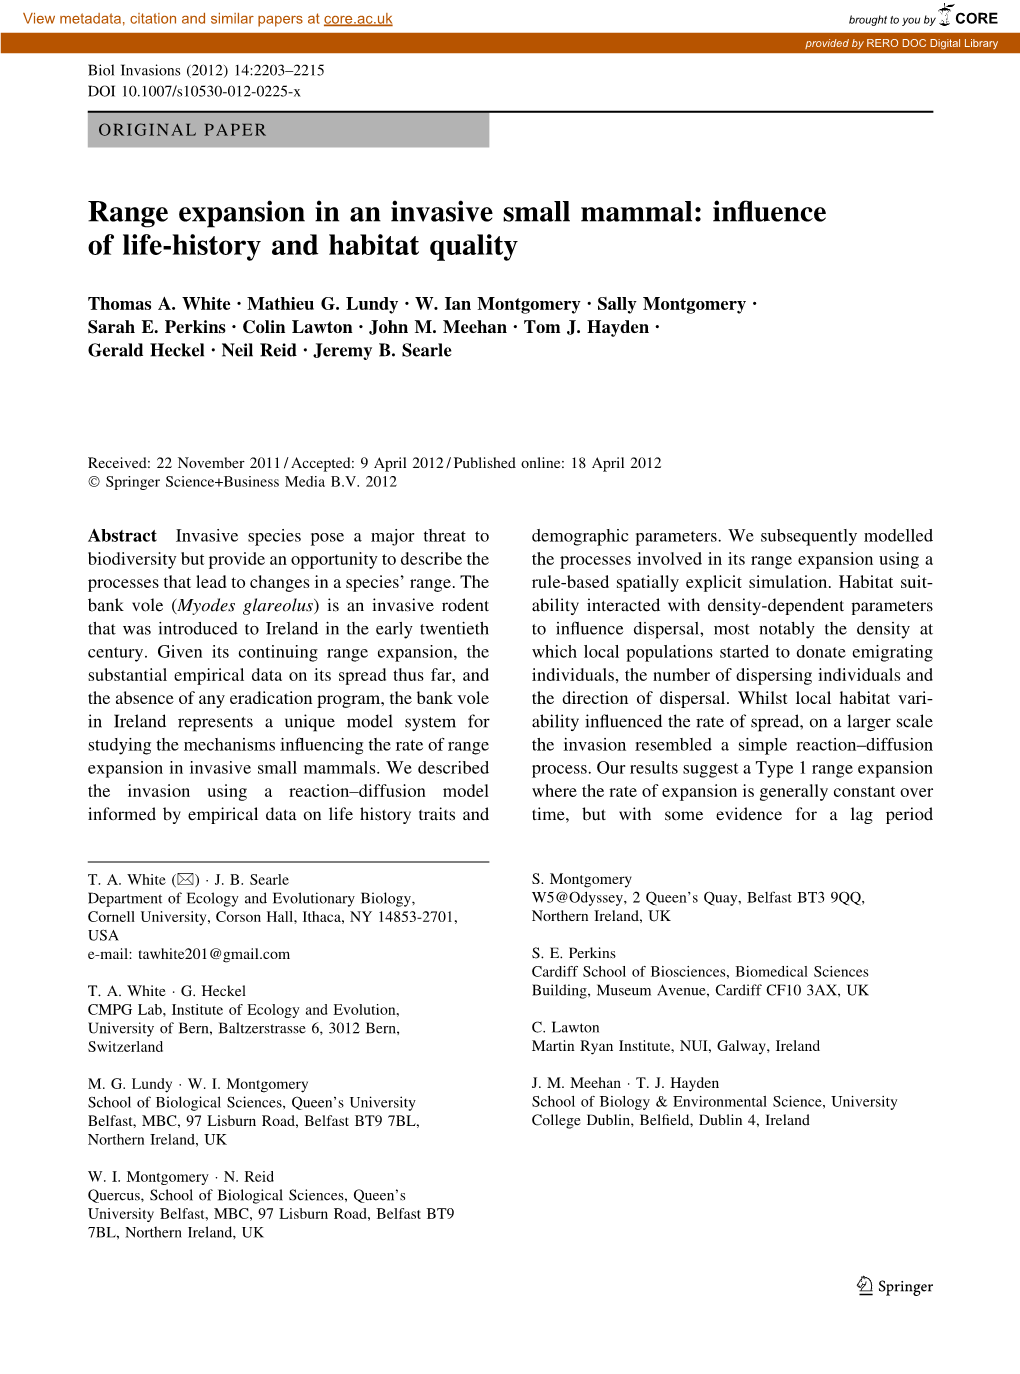 Range Expansion in an Invasive Small Mammal: Inﬂuence of Life-History and Habitat Quality